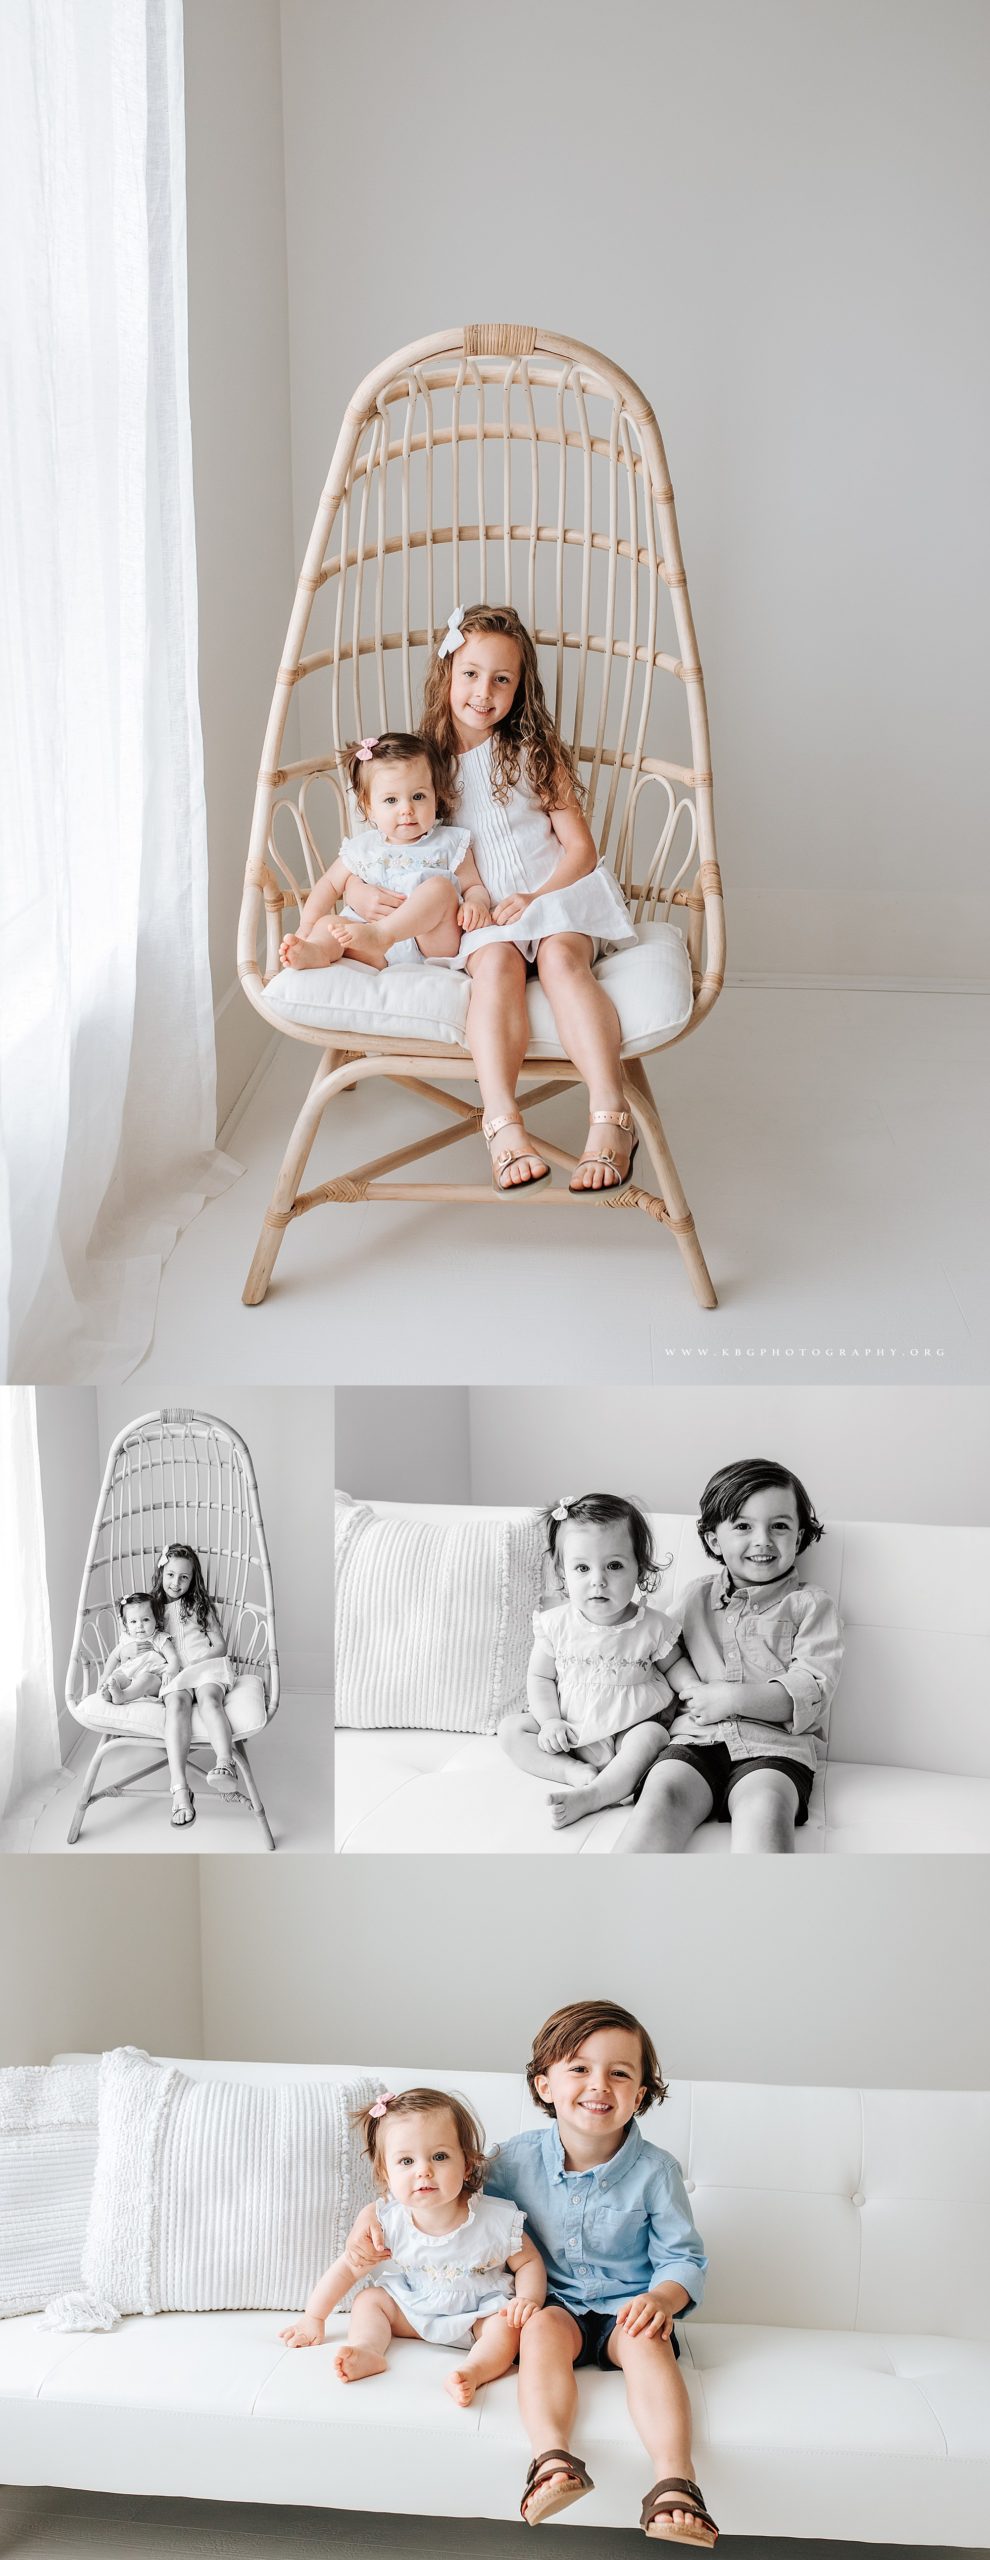 siblings posing together - marietta child photographer